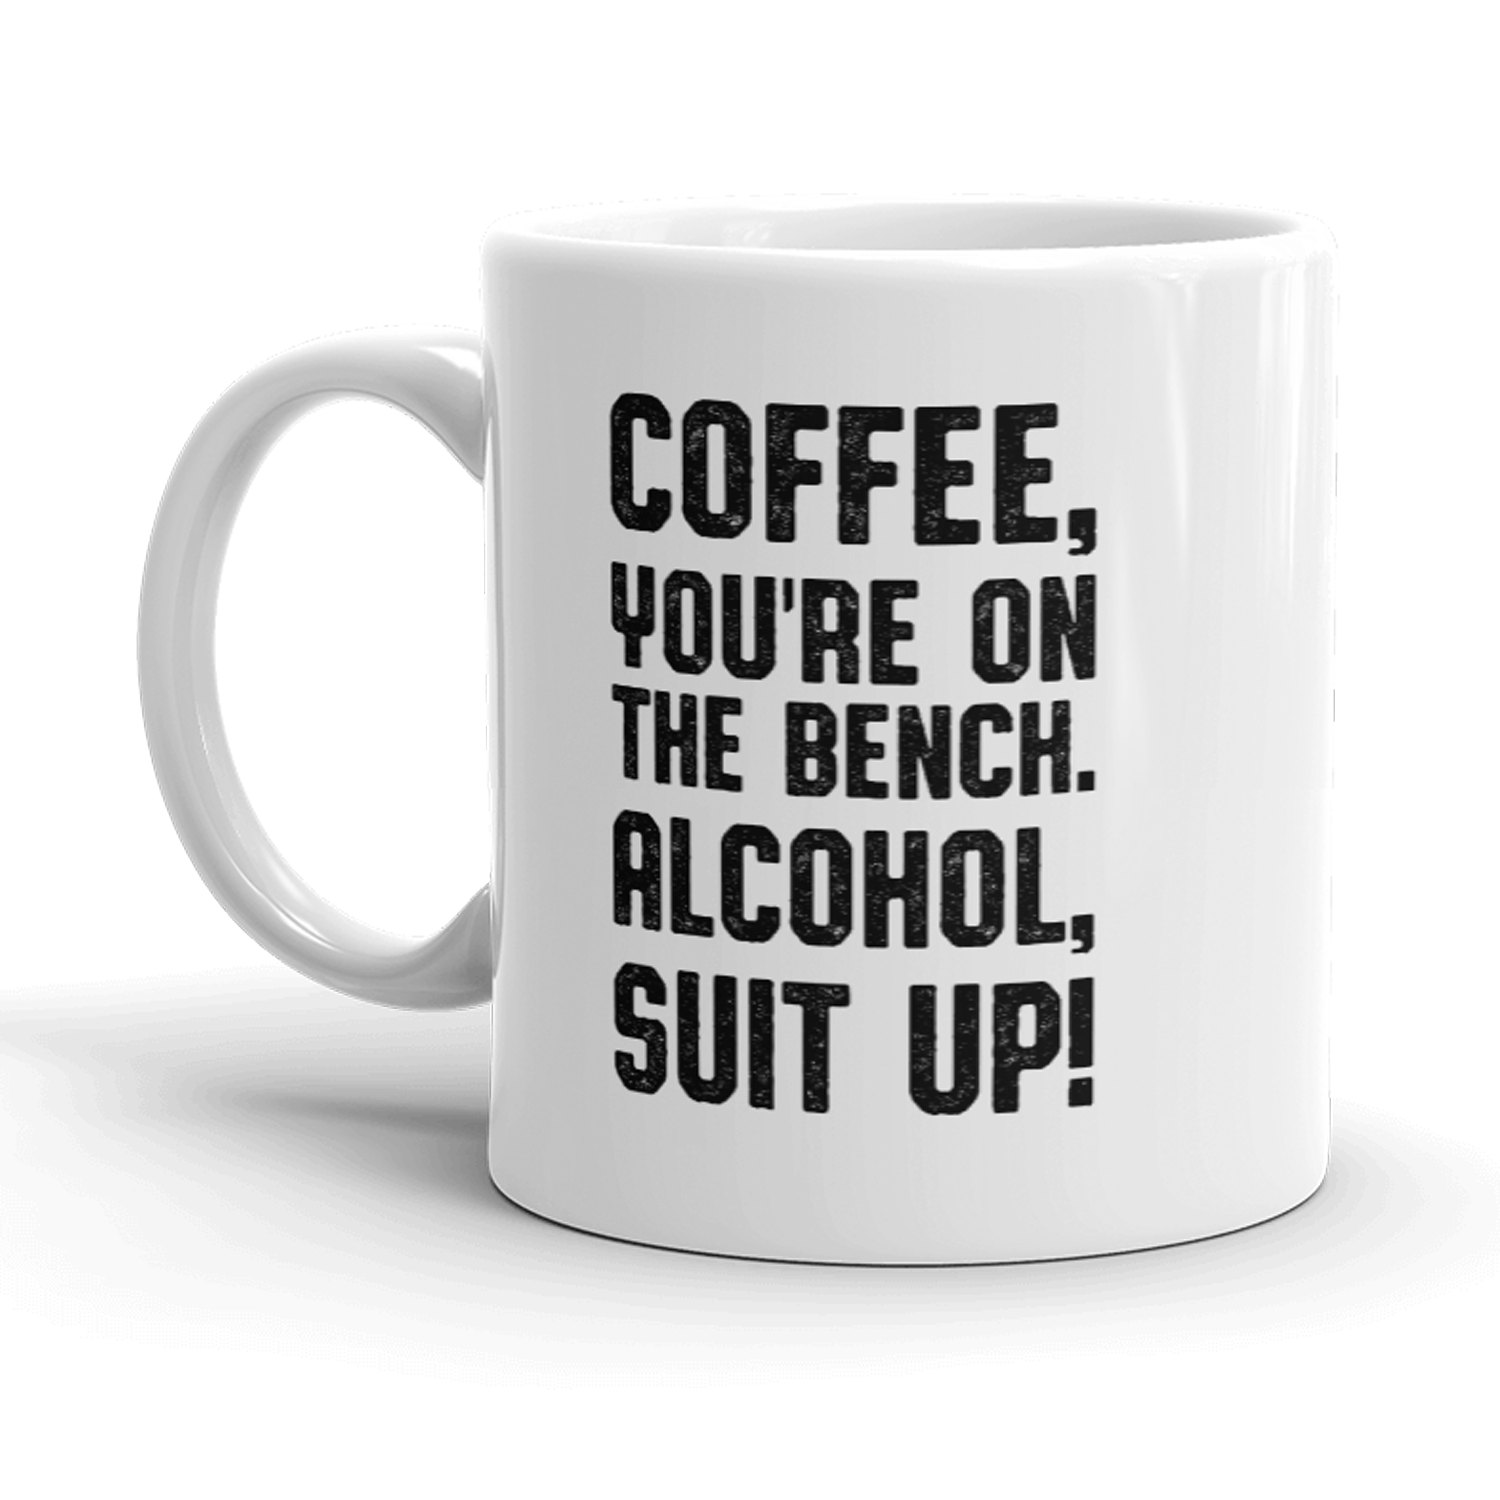 Coffee Youre On The Bench Alcohol Suit Up Mug Funny Caffeine Coffee Cup-11oz  -  Crazy Dog T-Shirts